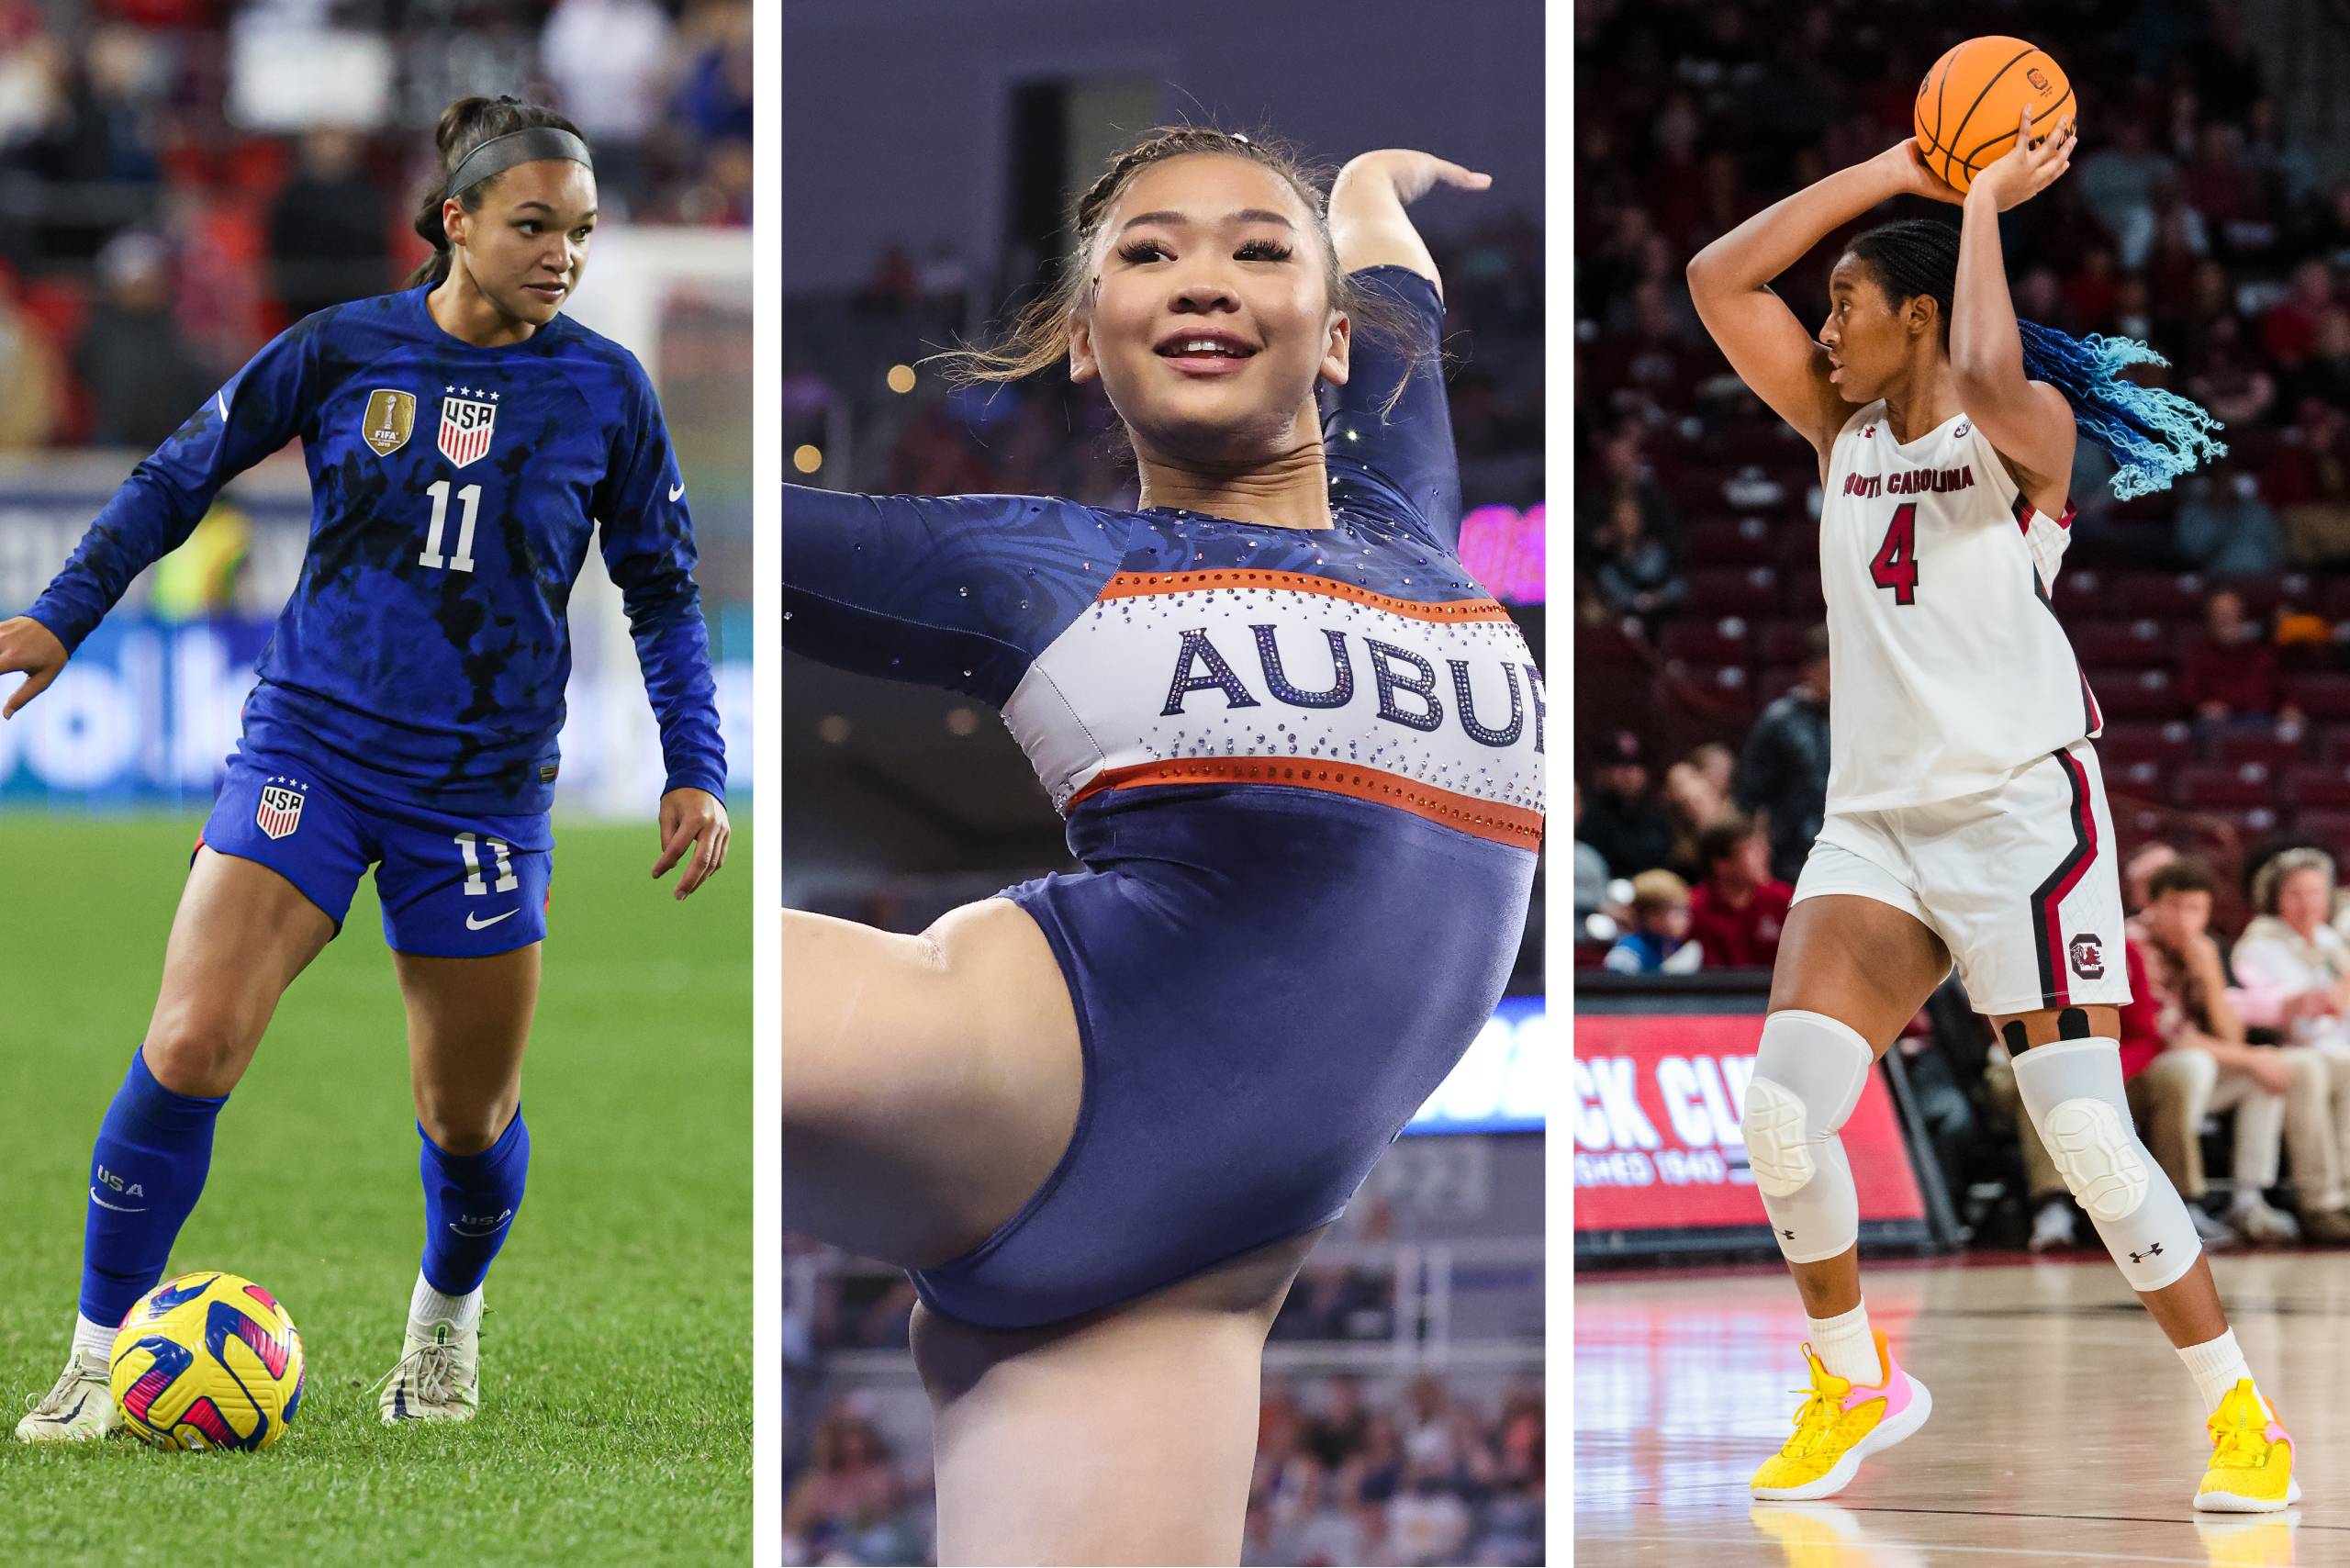 Who are the top 15 most beautiful female athletes in 2022?